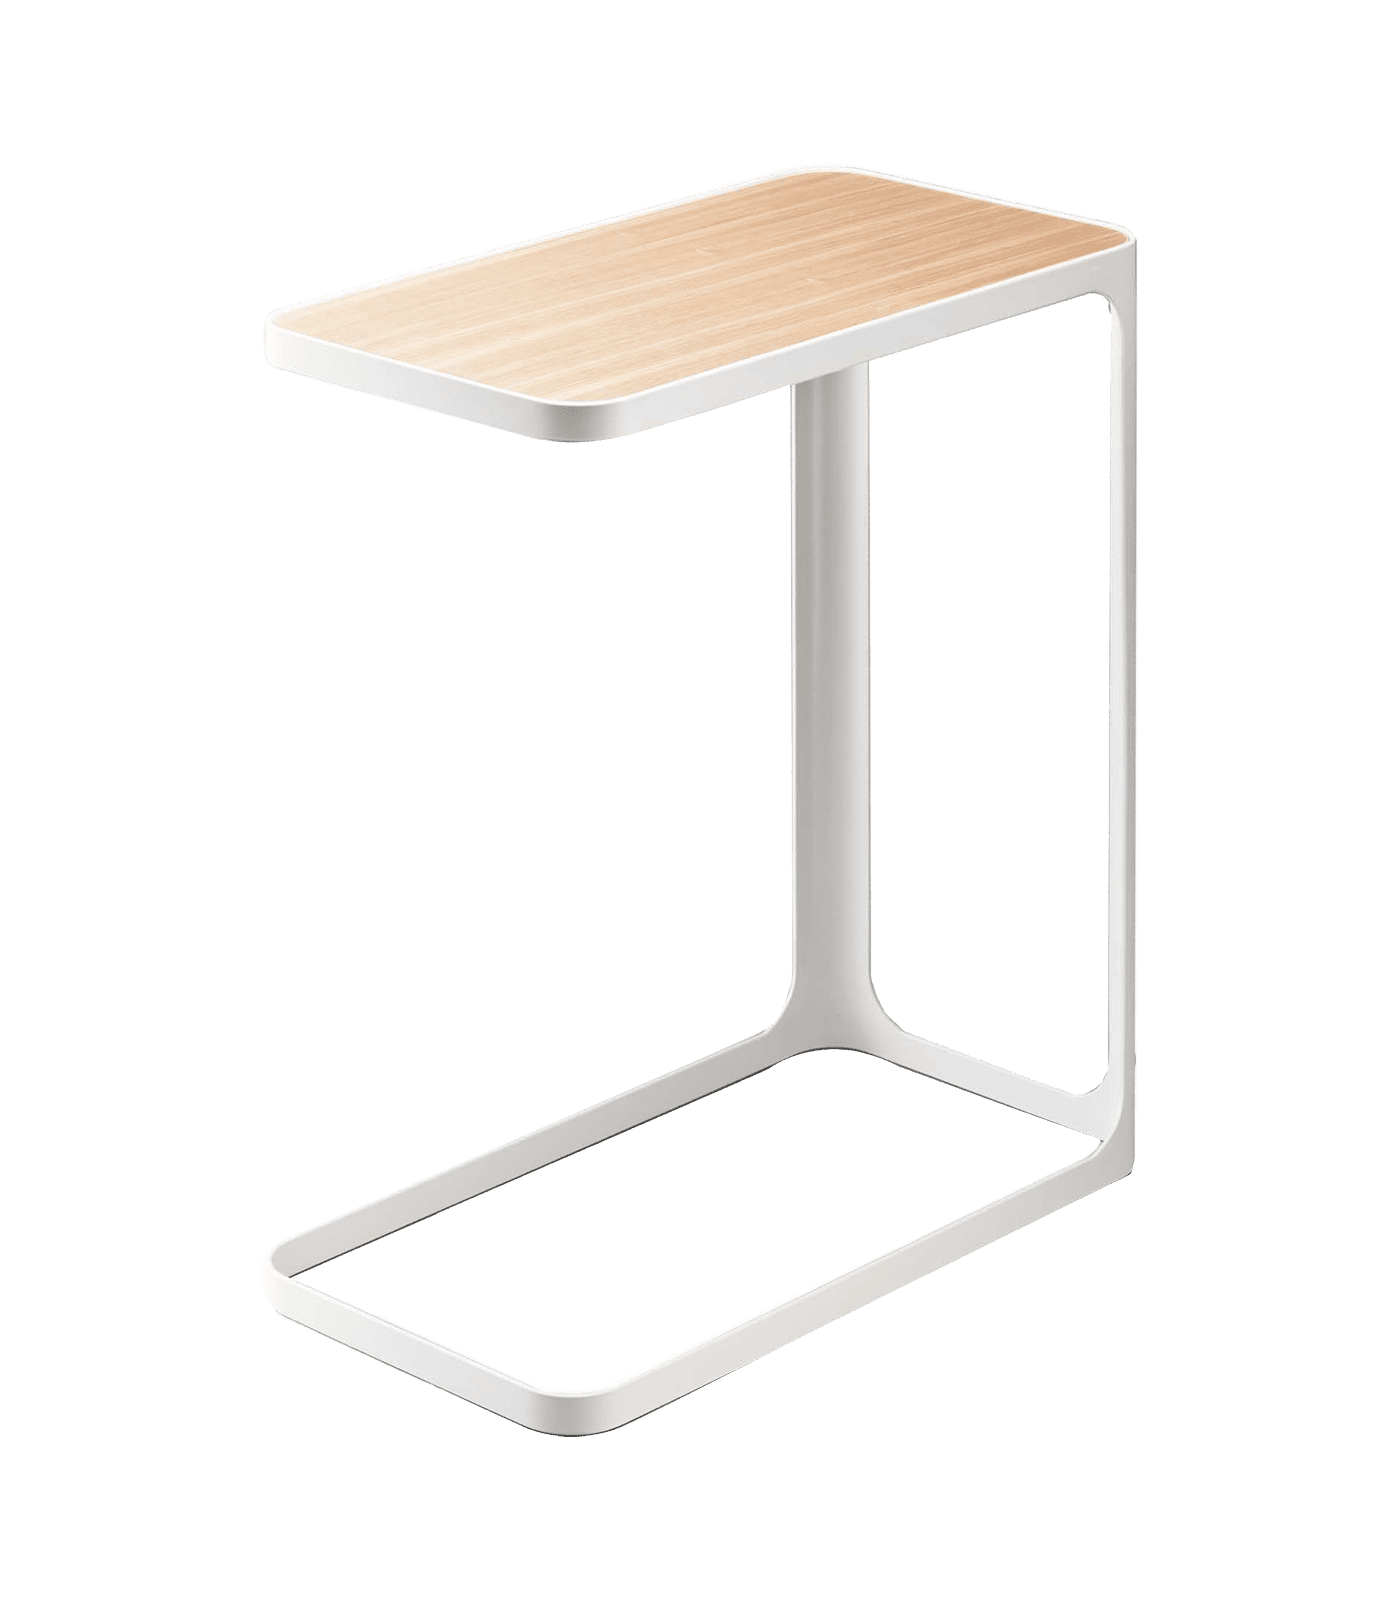 Minimalist Metal and Wood C-Shaped Side Table - Compact and Versatile